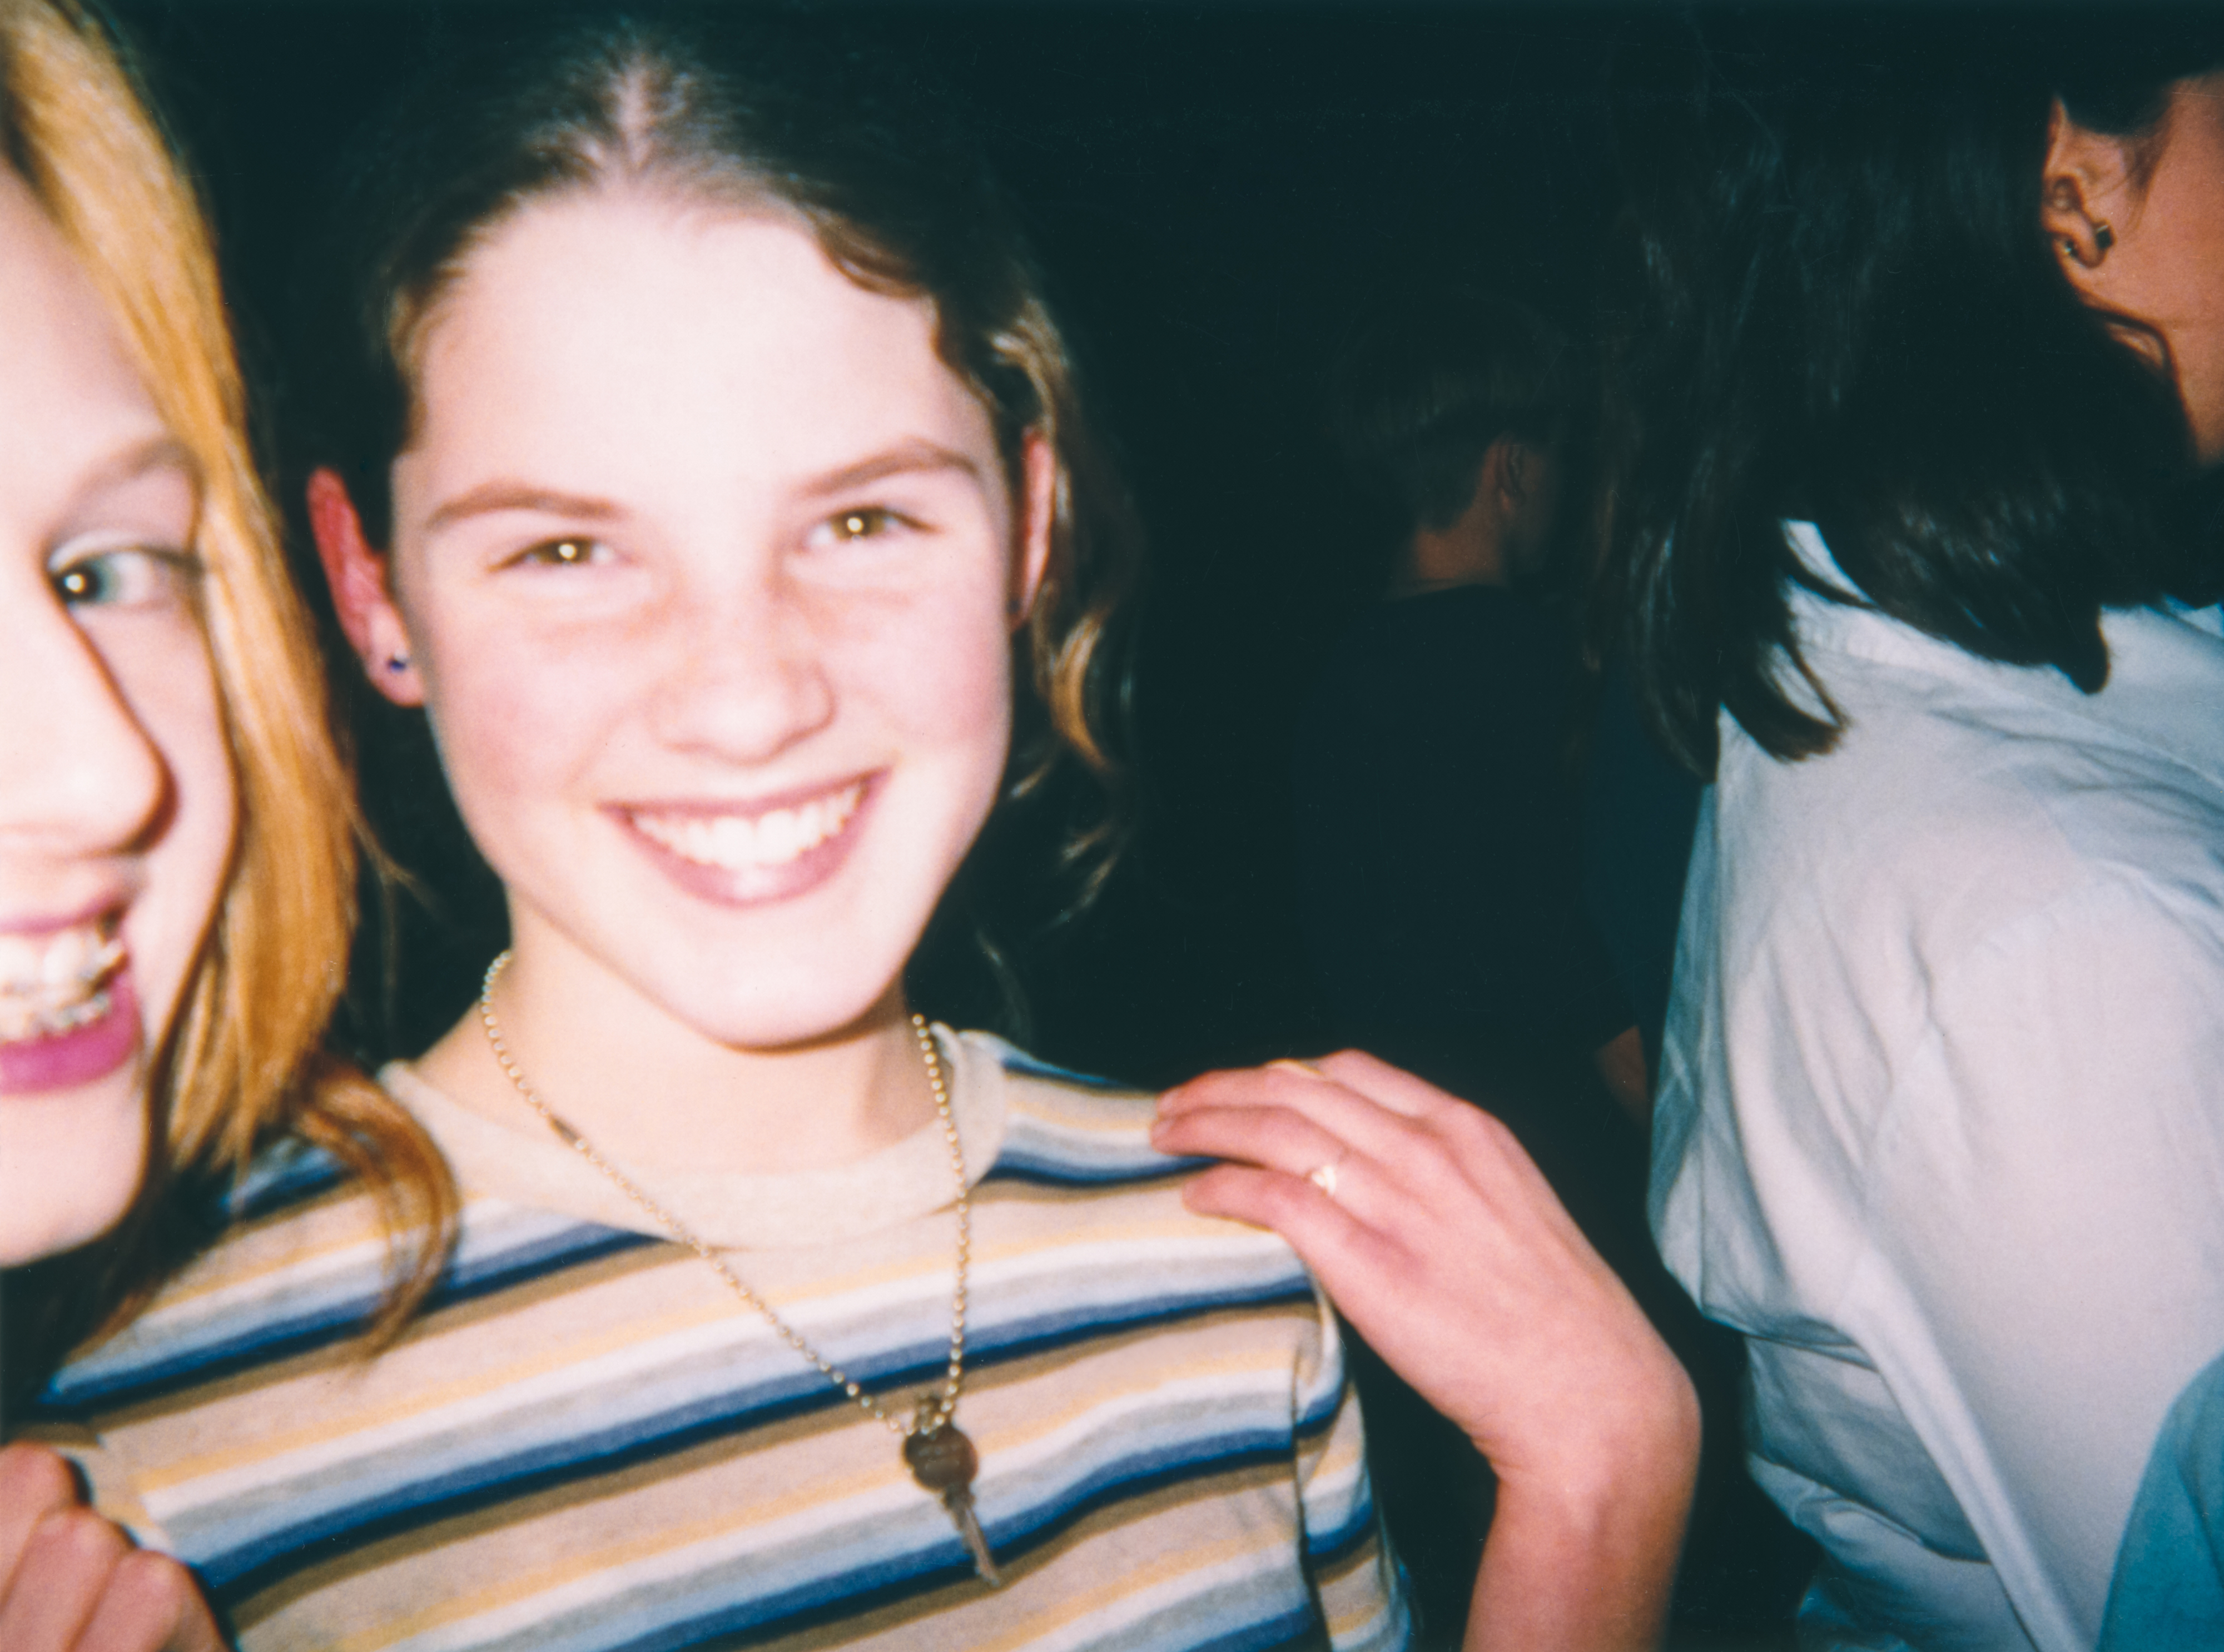 Two individuals smiling for a close-up photo, one partially cropped from left, wearing striped shirt and necklace